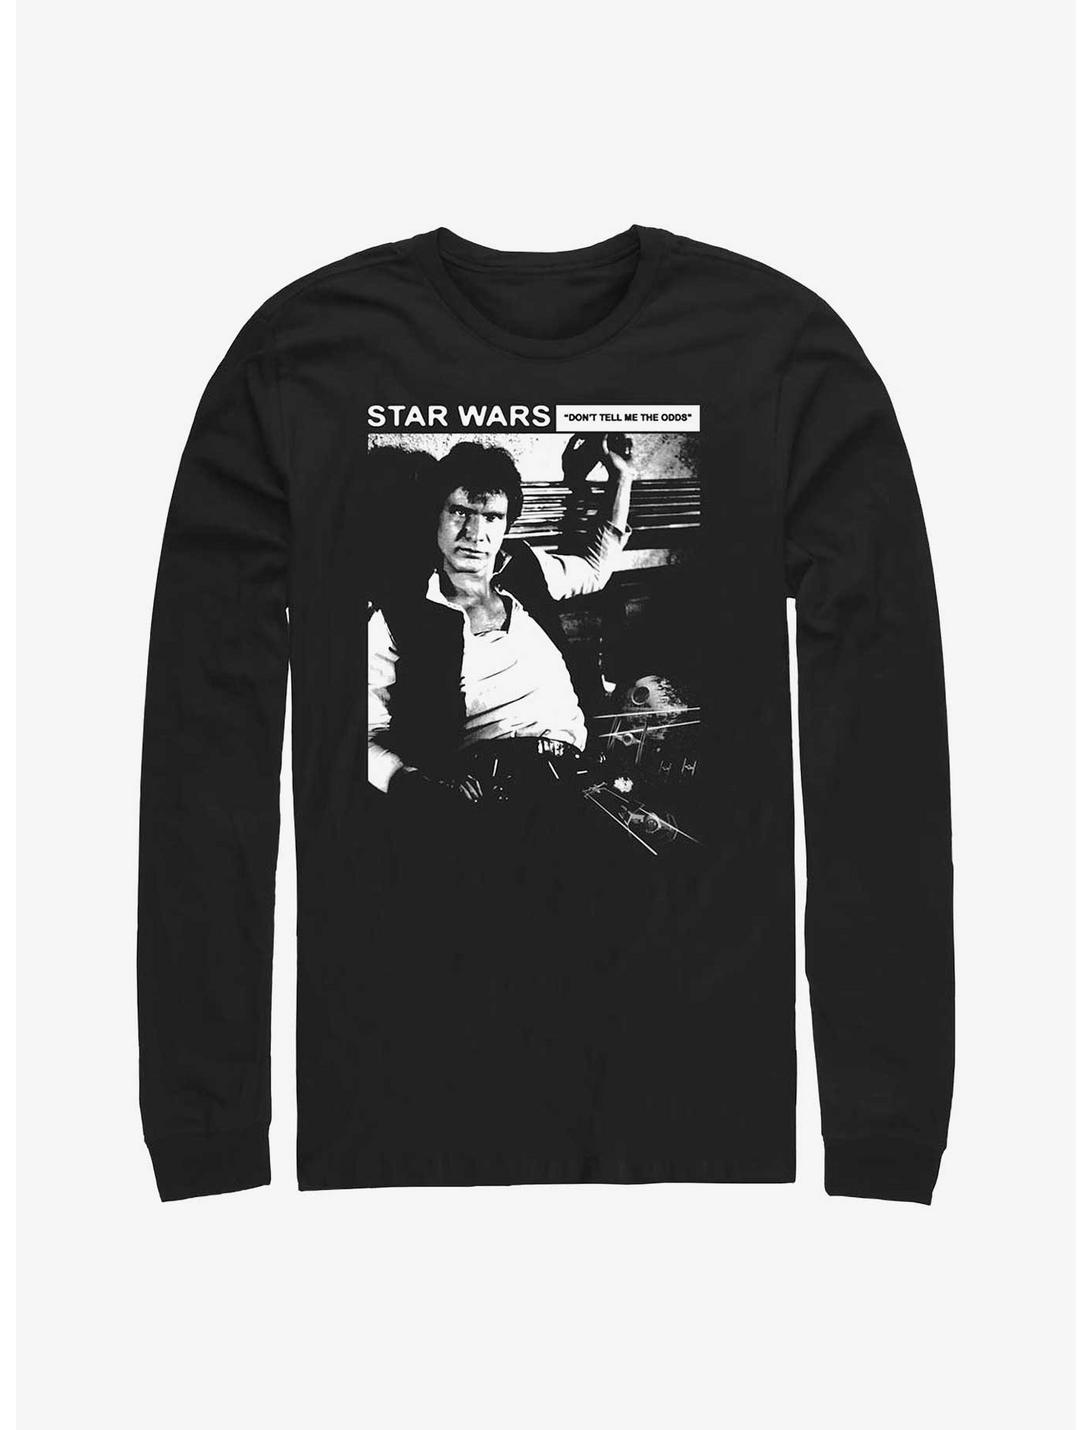 Star Wars Don't Tell Me The Odds Han Solo Long-Sleeve T-Shirt, BLACK, hi-res